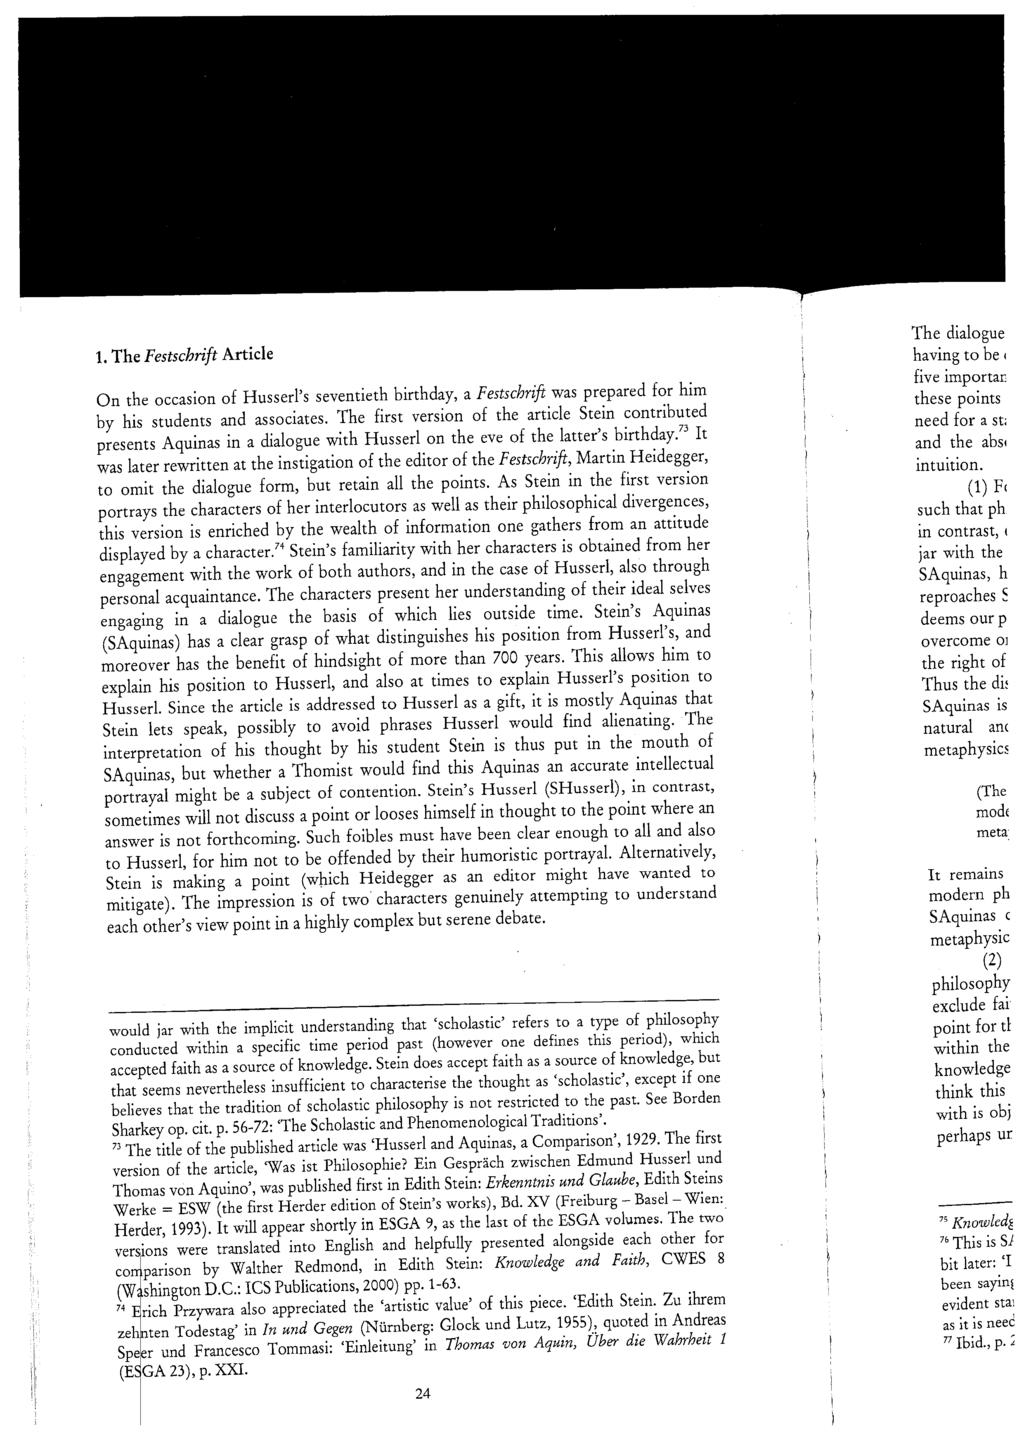 1. The Festschrift Article On the occasion of Husserl's seventieth birthday, a Festschrift was prepared for him by his students and associates.